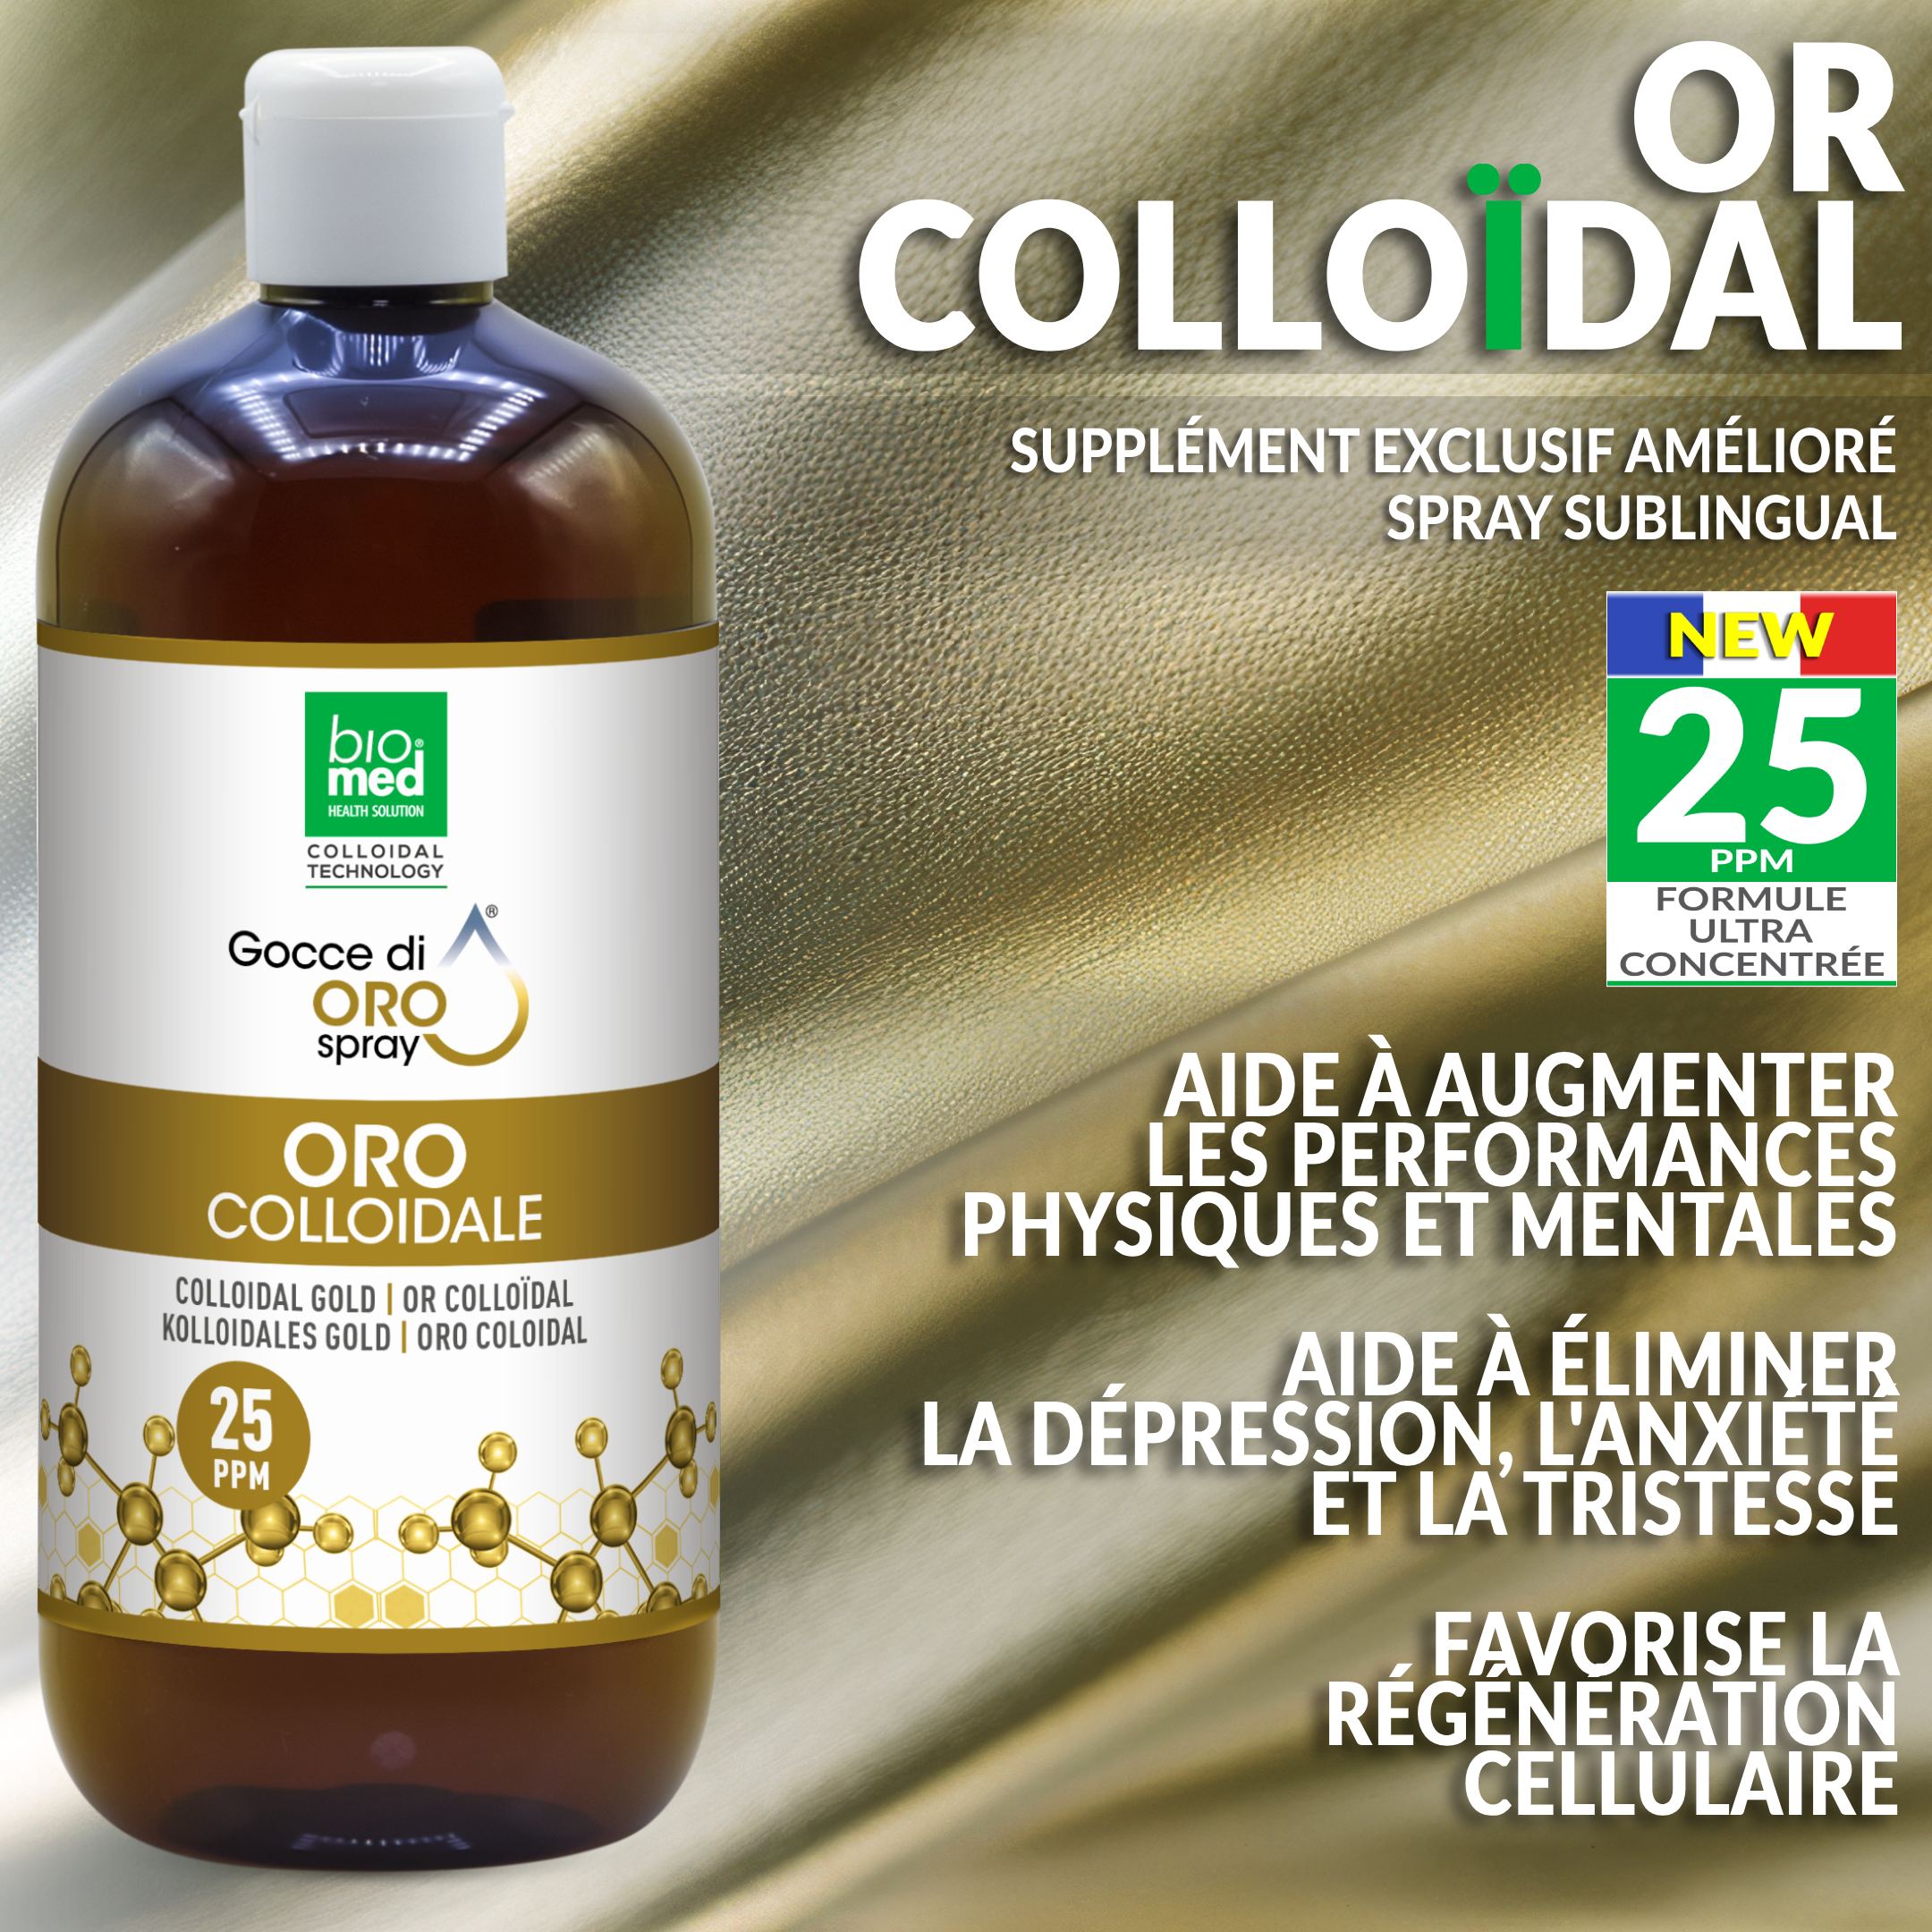 OR COLLOÏDAL SPRAY SUBLINGUAL PUR - GOUTTES NANO BIOMED - 500 ML - 25 PPM